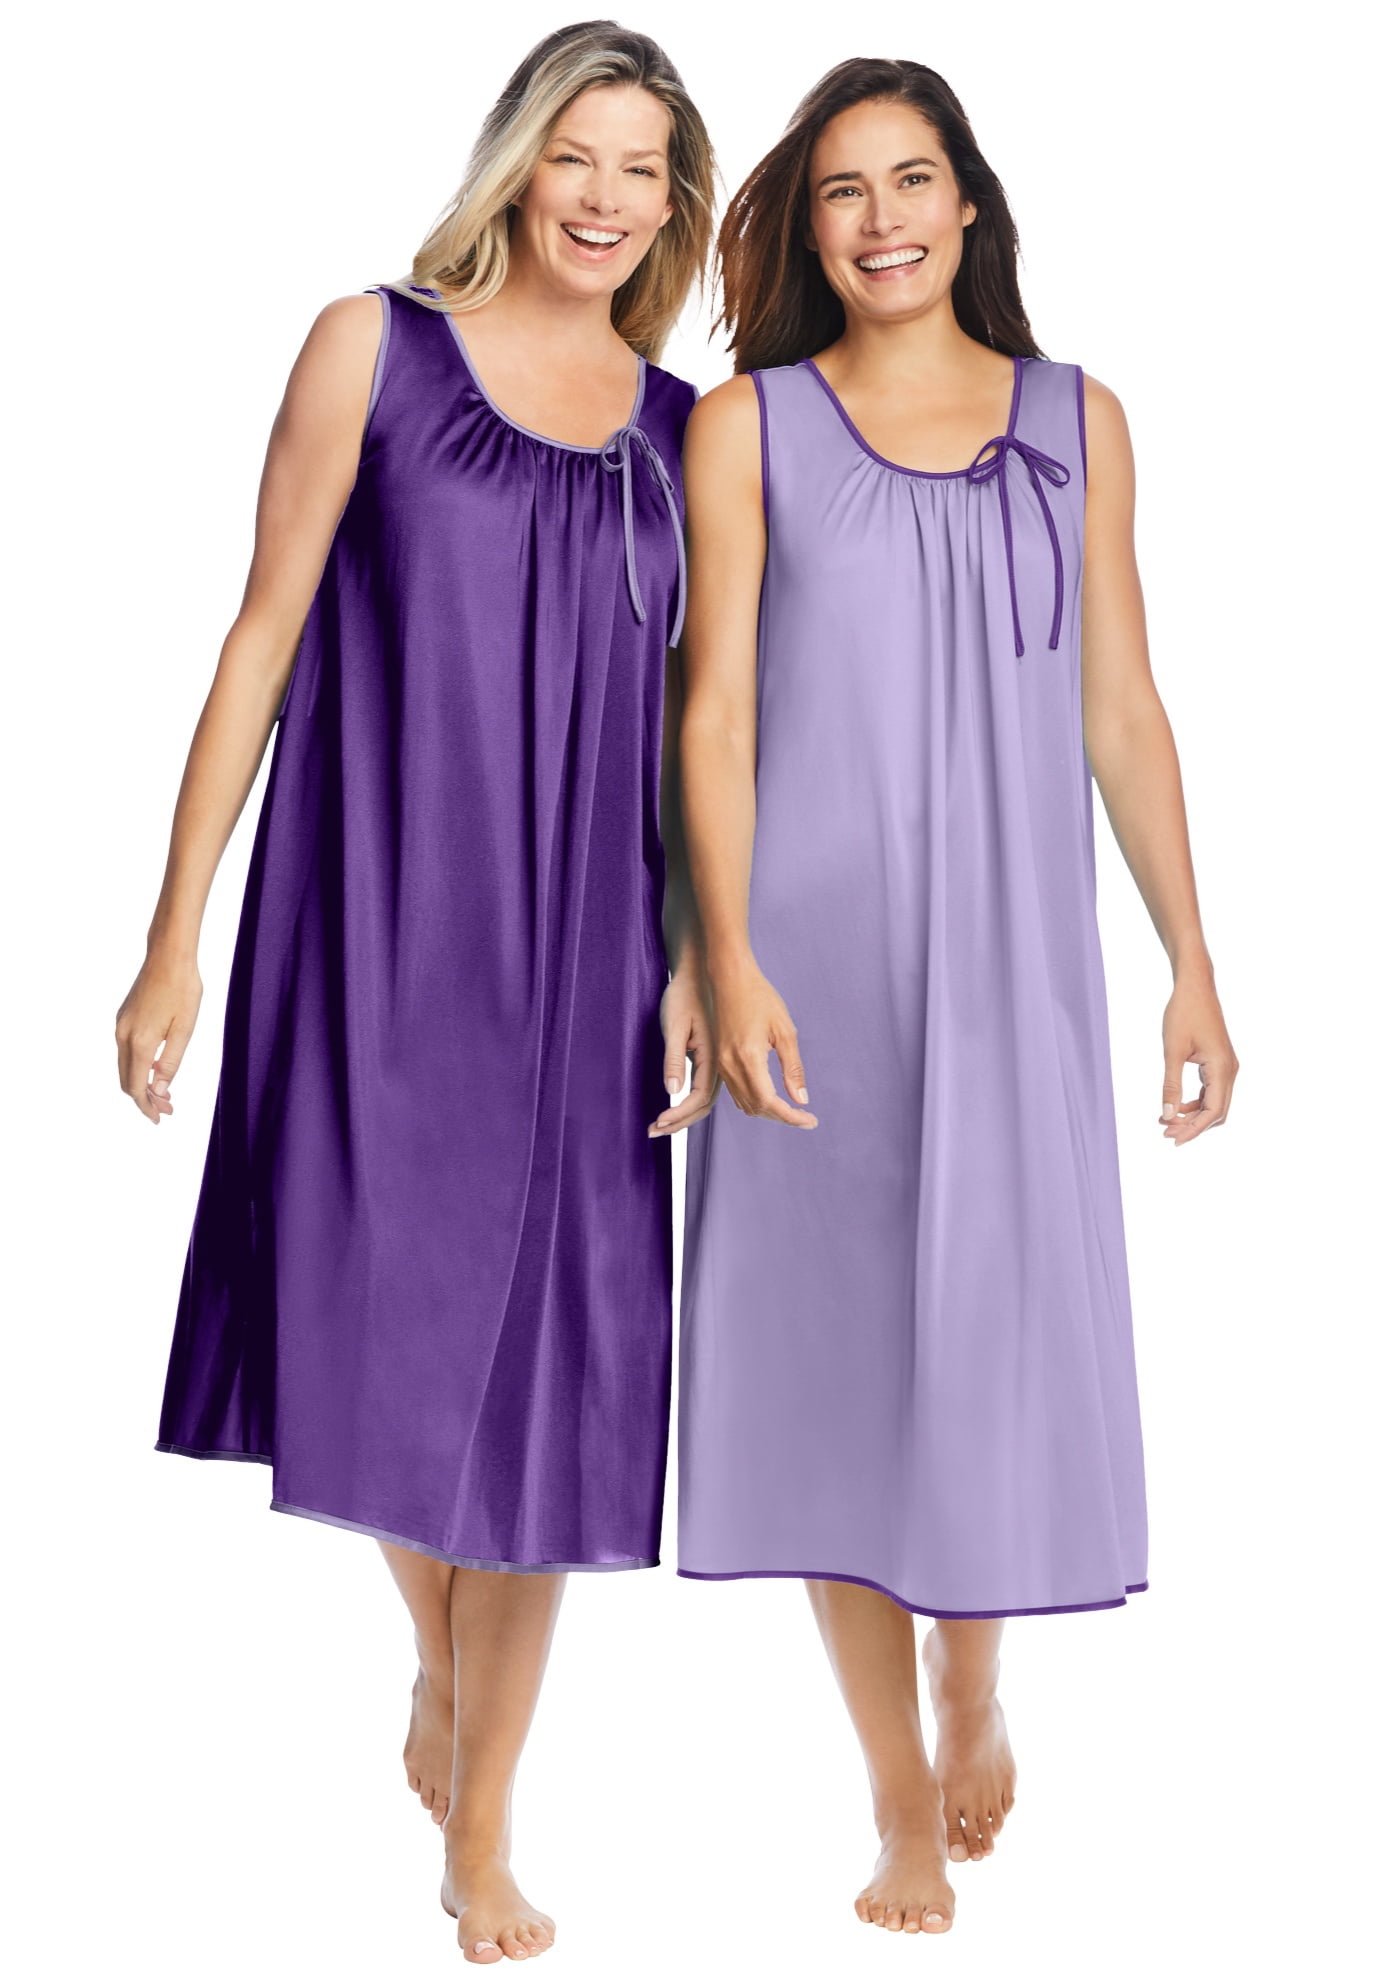 Only Necessities Women's Plus Size 2-Pack Sleeveless Nightgown Nightgown